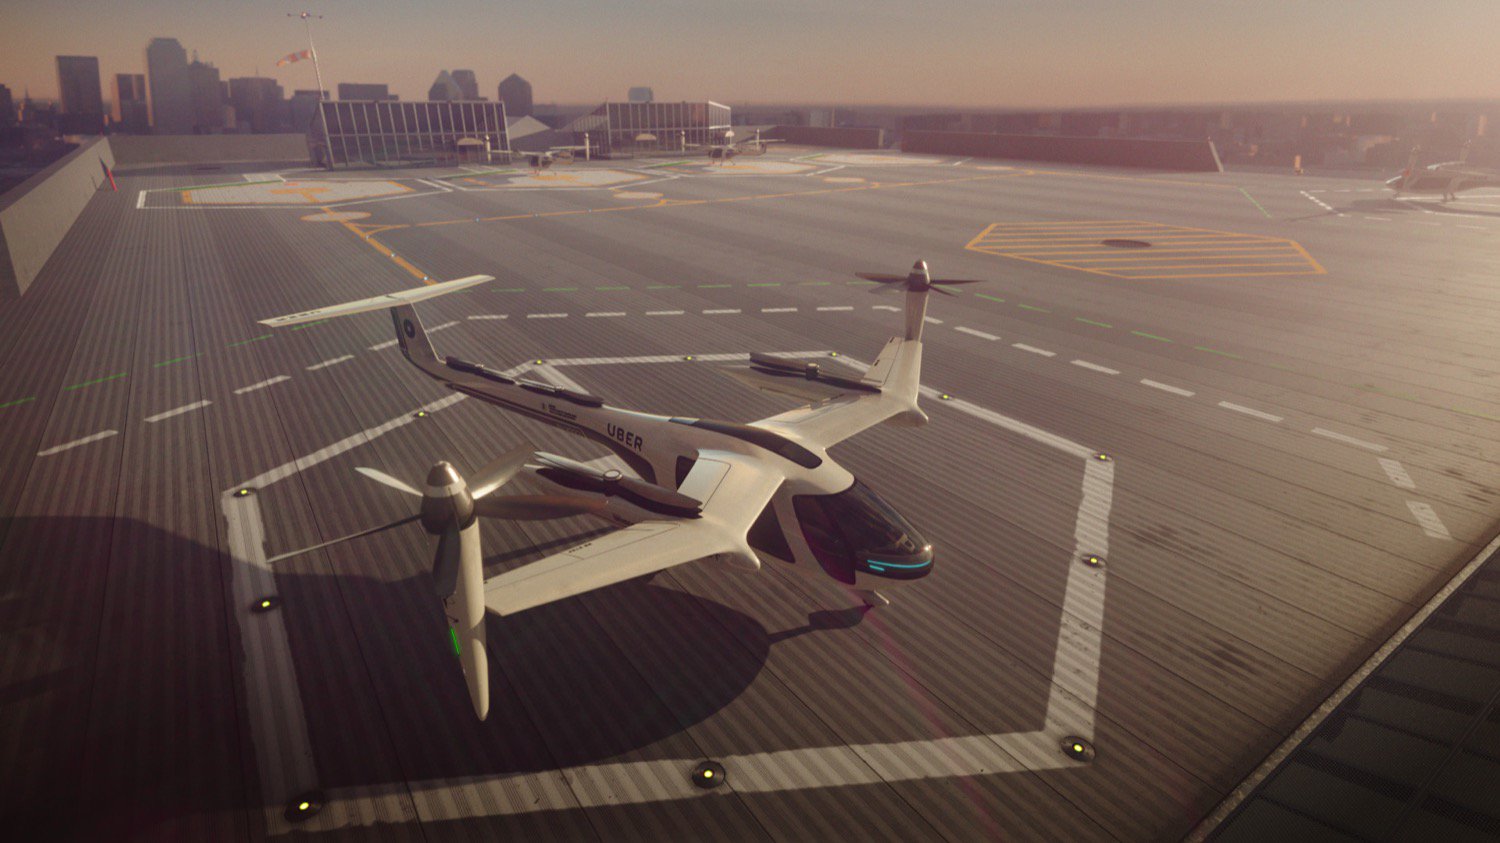 The architects designed six stops of the future for the flying Uber